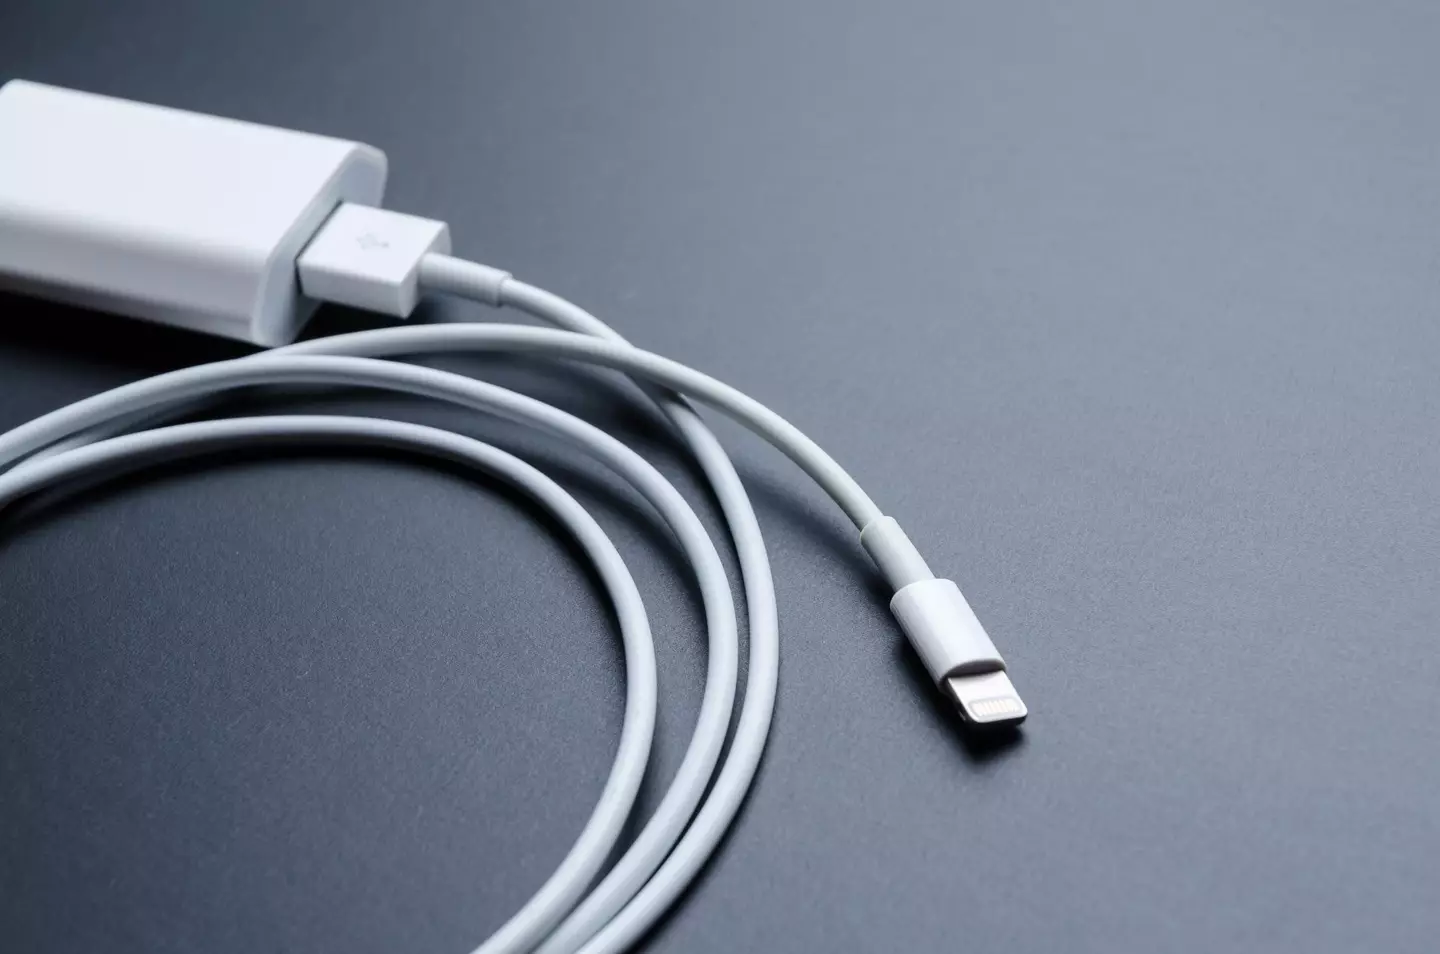 The Lightning charger cable will soon be obsolete.